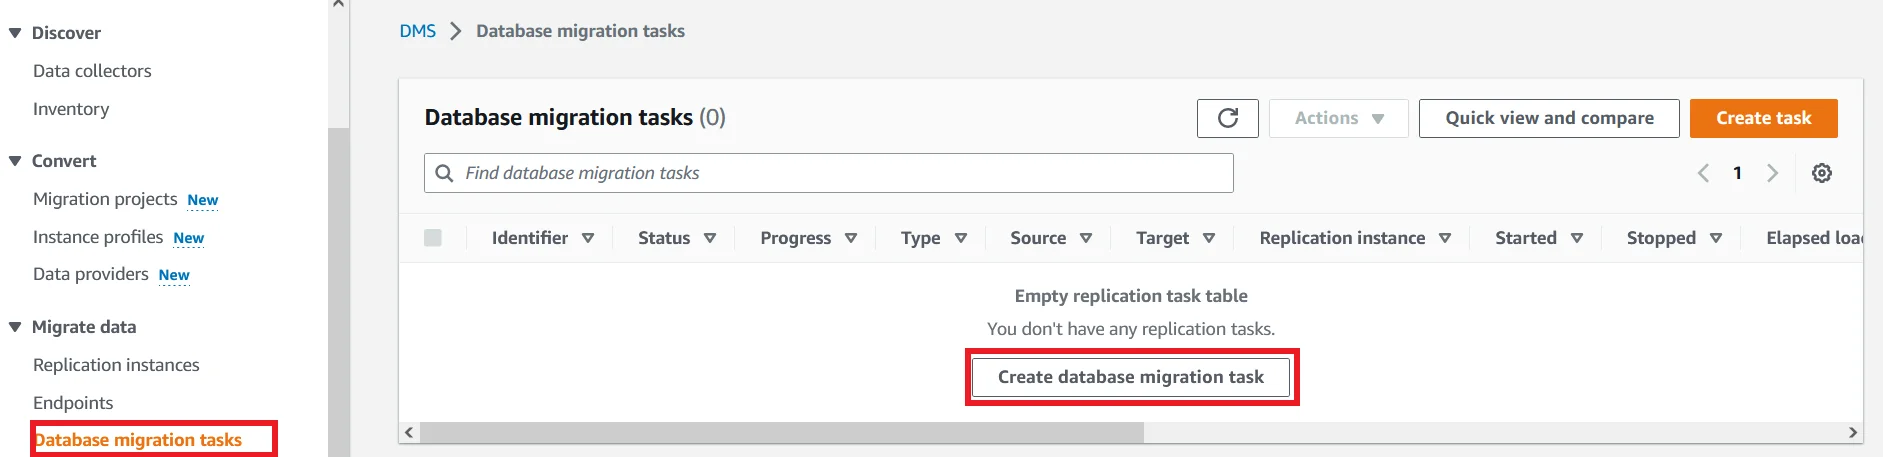 Upgrade MySQL 5.7 RDS DB Instance to Latest Version with Zero Downtime Database Migration Task